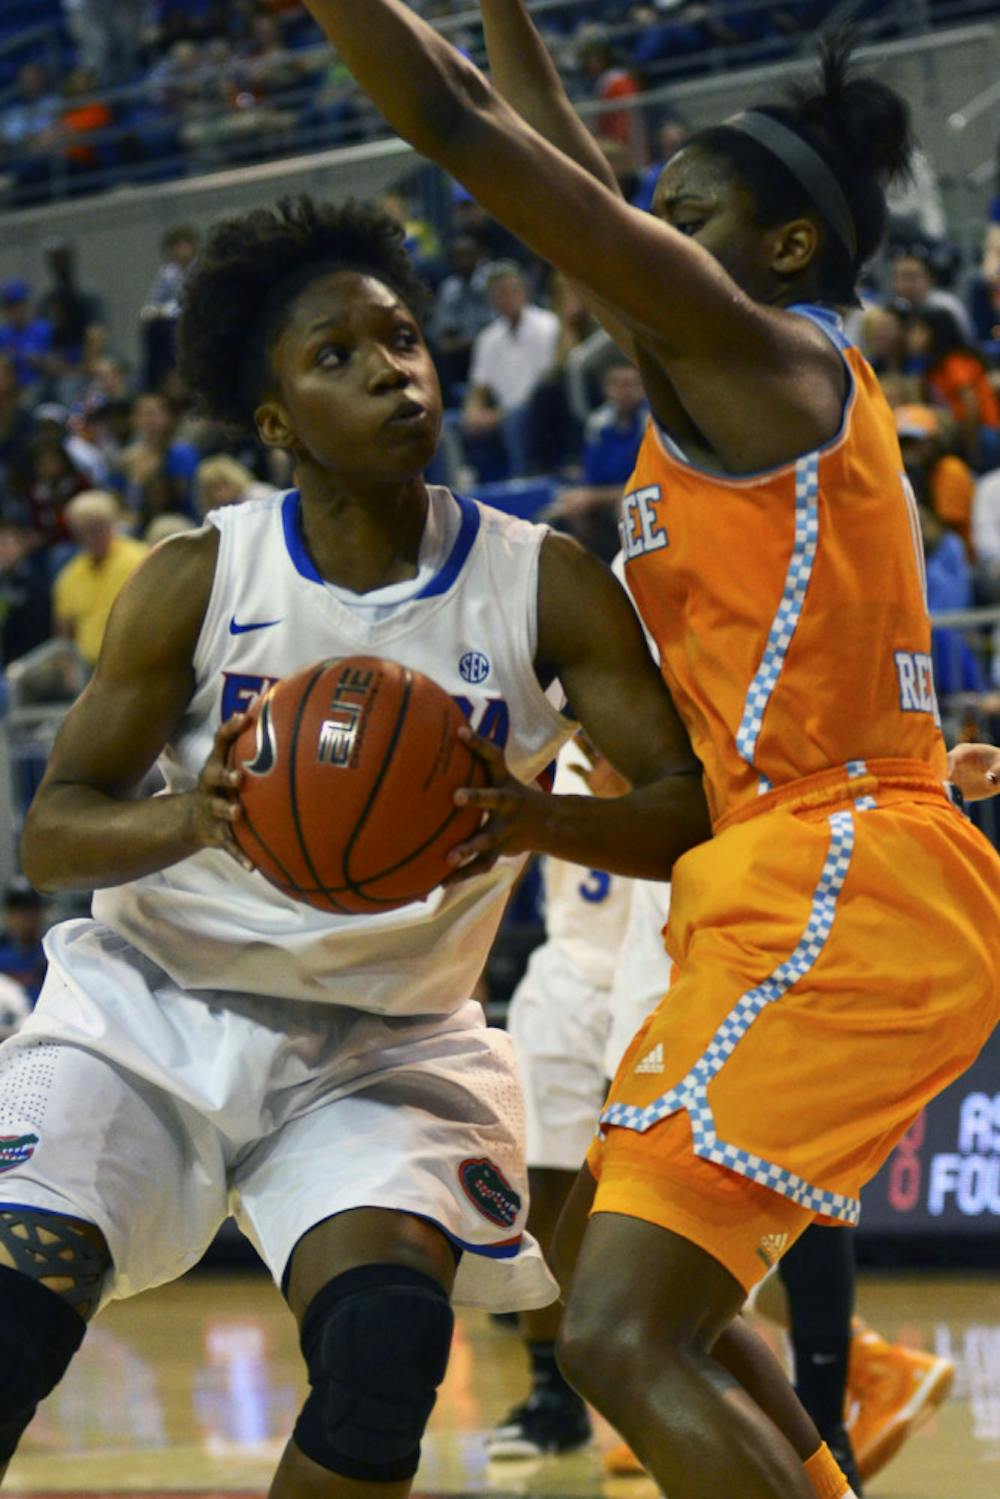 <p dir="ltr" align="justify">Kayla Lewis prepares to shoot during Florida’s 64-56 loss to Tennessee on Feb. 8 in the O’Connell Center. Lewis is the lone senior on the Gators’ roster this season.</p>